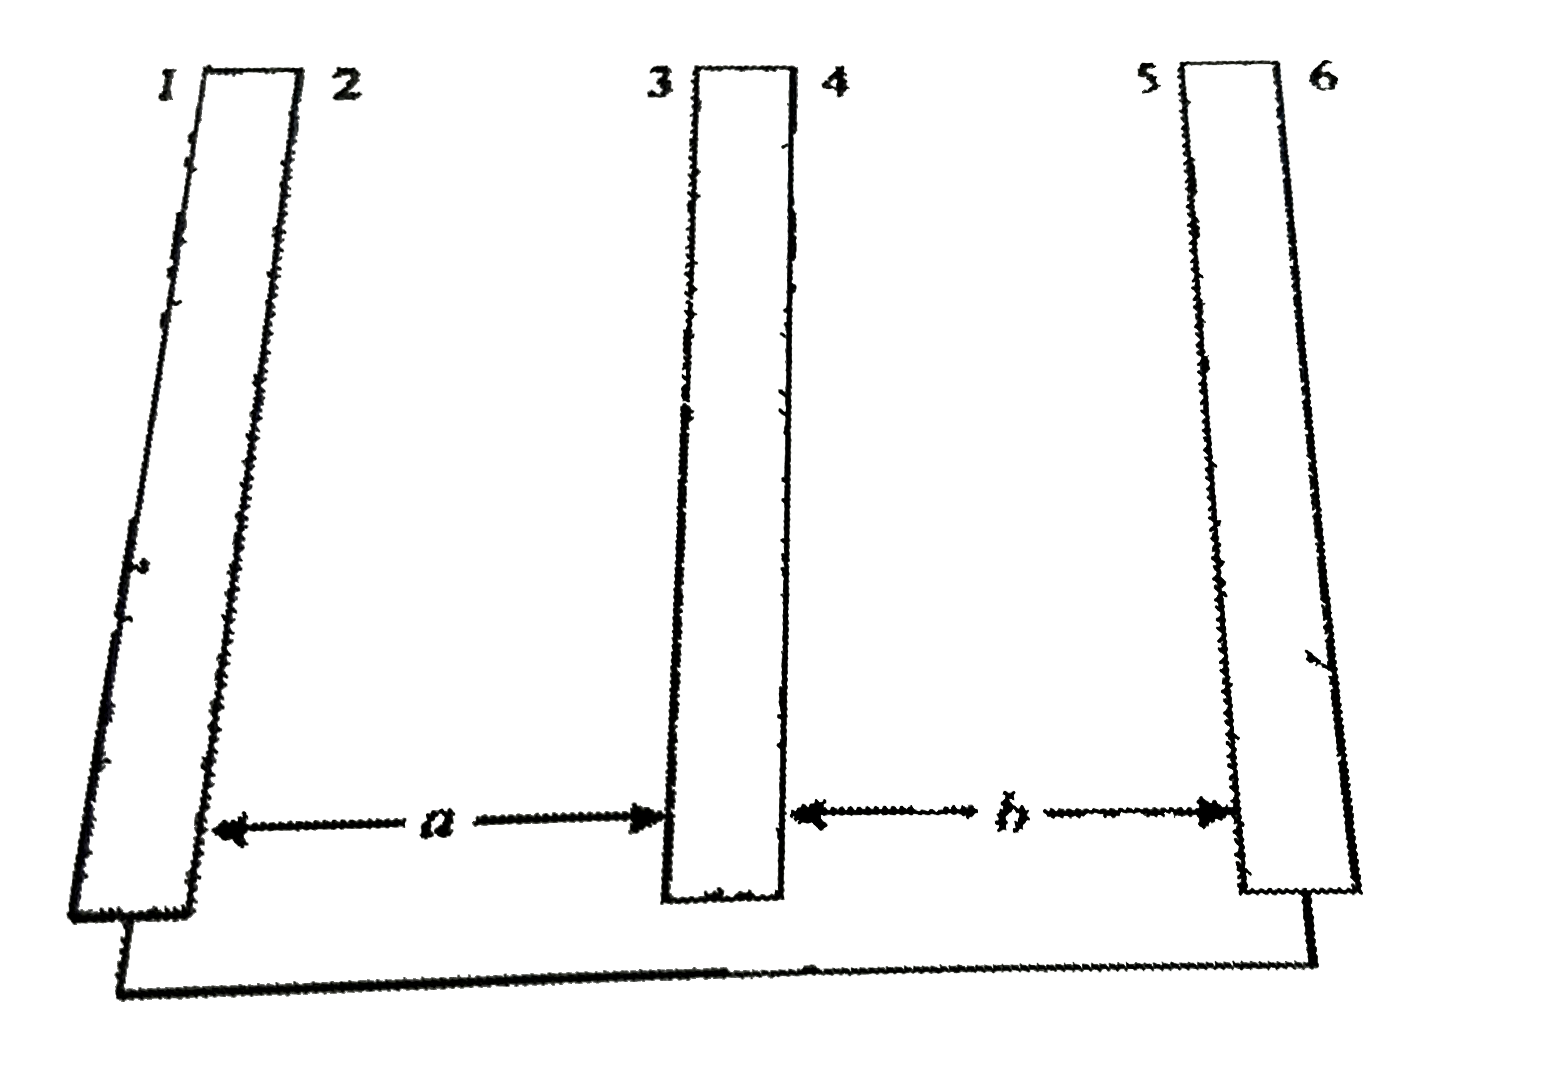 Three identical metallic plates are kept parallel to one another at a separation of a and b The outer plates are connected by a thin conducting wire and a charge Q is placed on the central plate Find final charges on all the surfaces of the three plates.      [faces(1) Q/2,(2) -(Qb)/(a+b),(3) (Qb)/(a+b),(4)(Qa)/(a+b),(5)-(Qa)/(a+b),(6)Q/3]